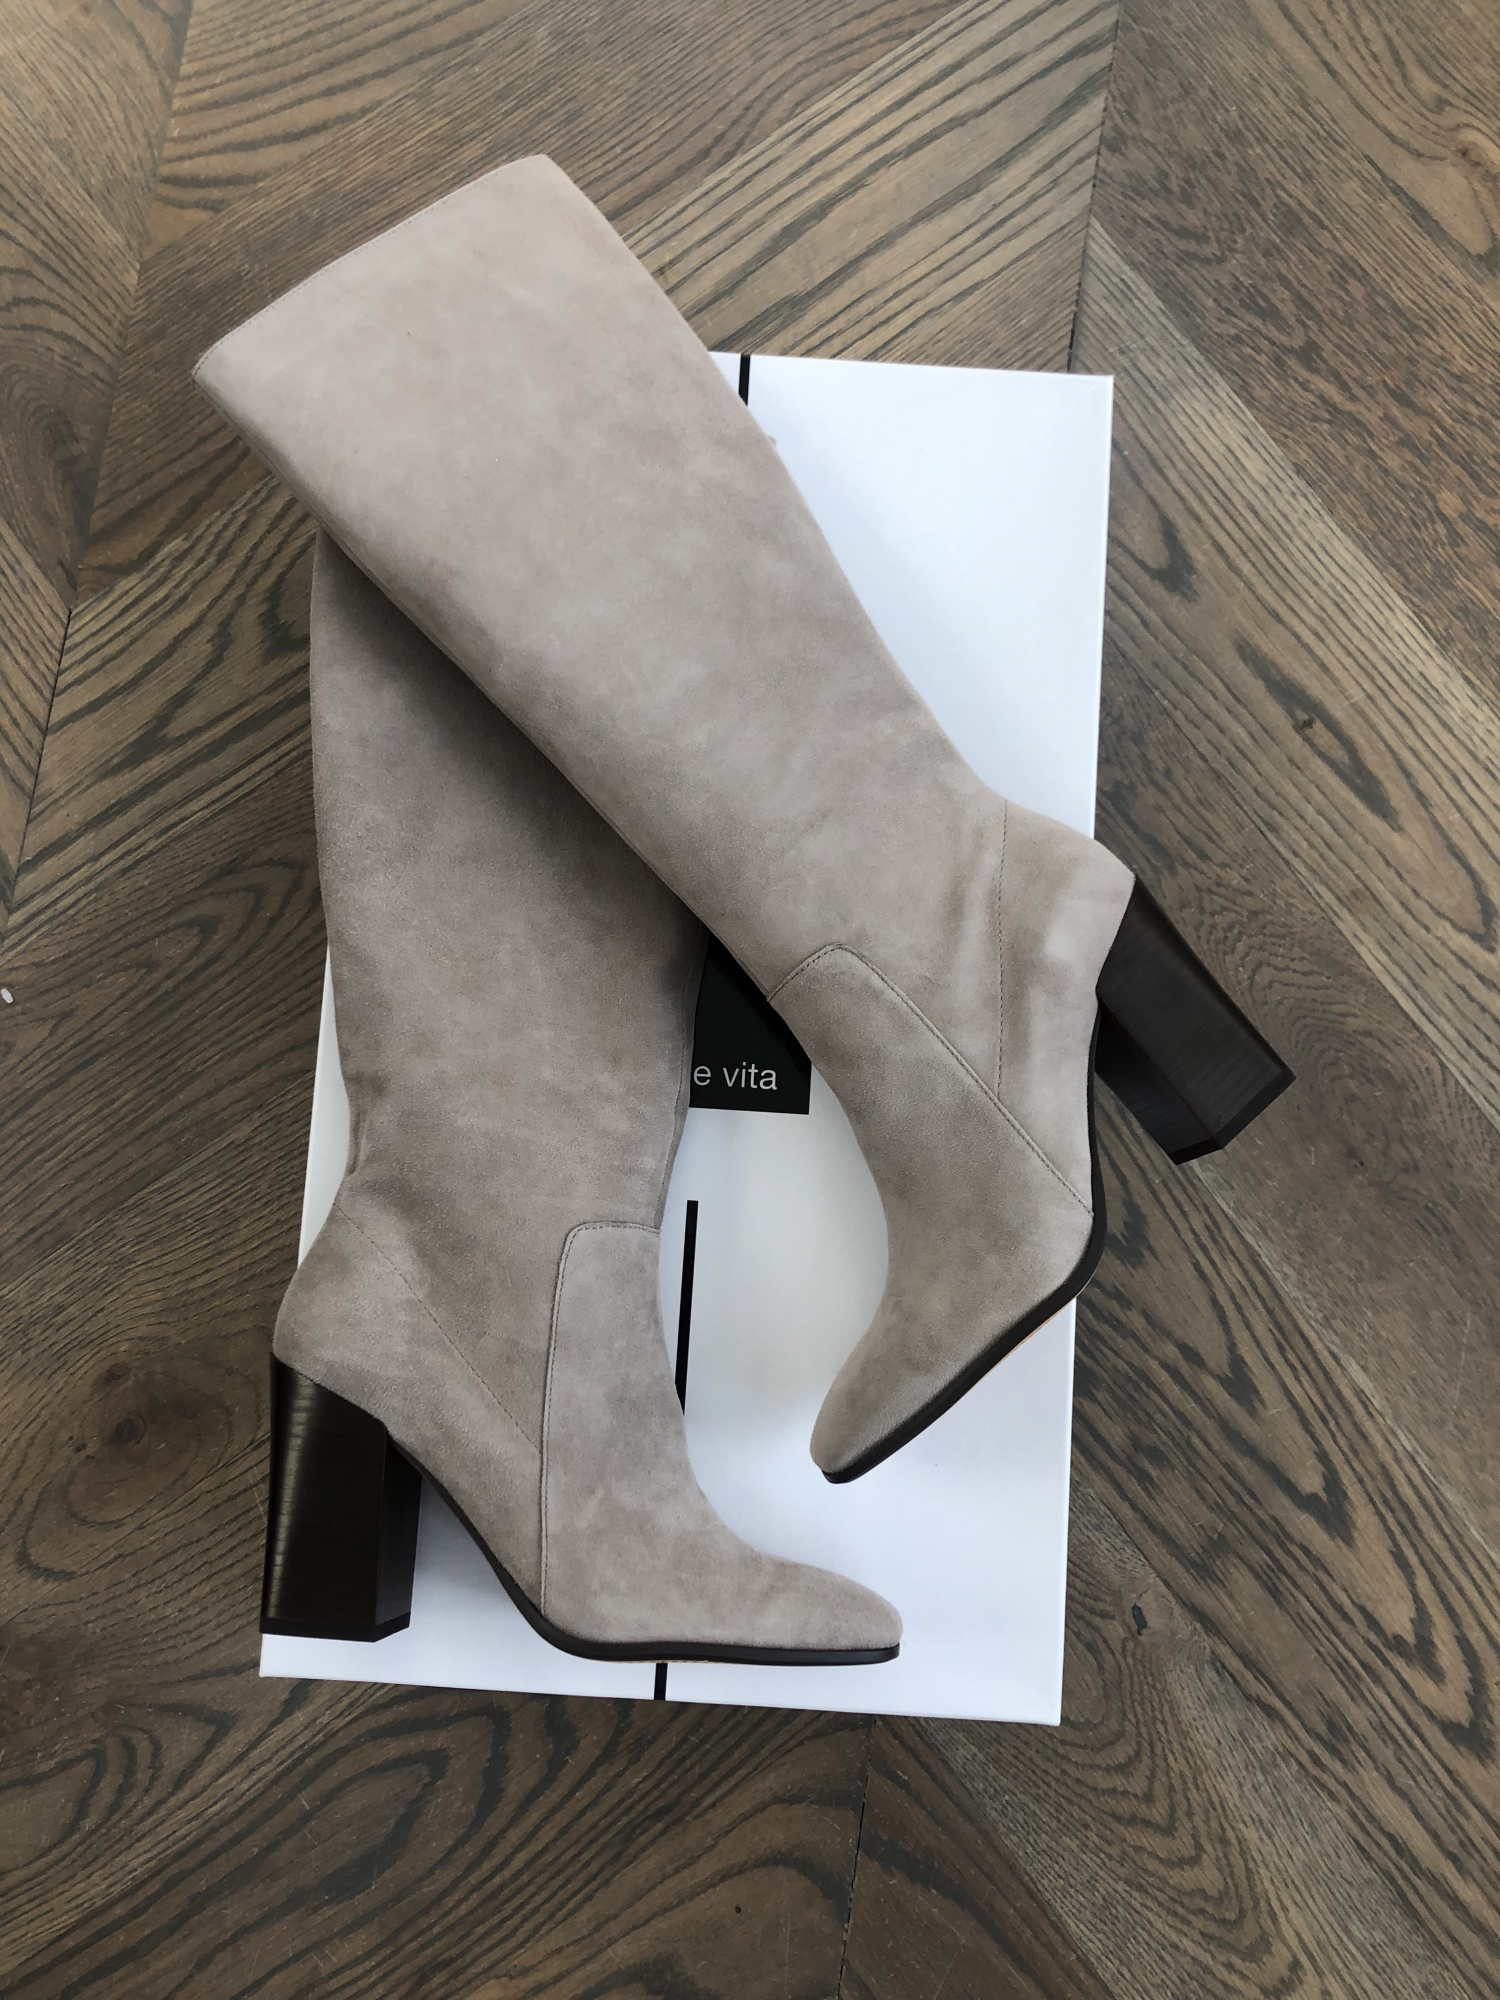 Shopbop sale fall 2019, taupe dolce vita boots, best knee boots taupe suade